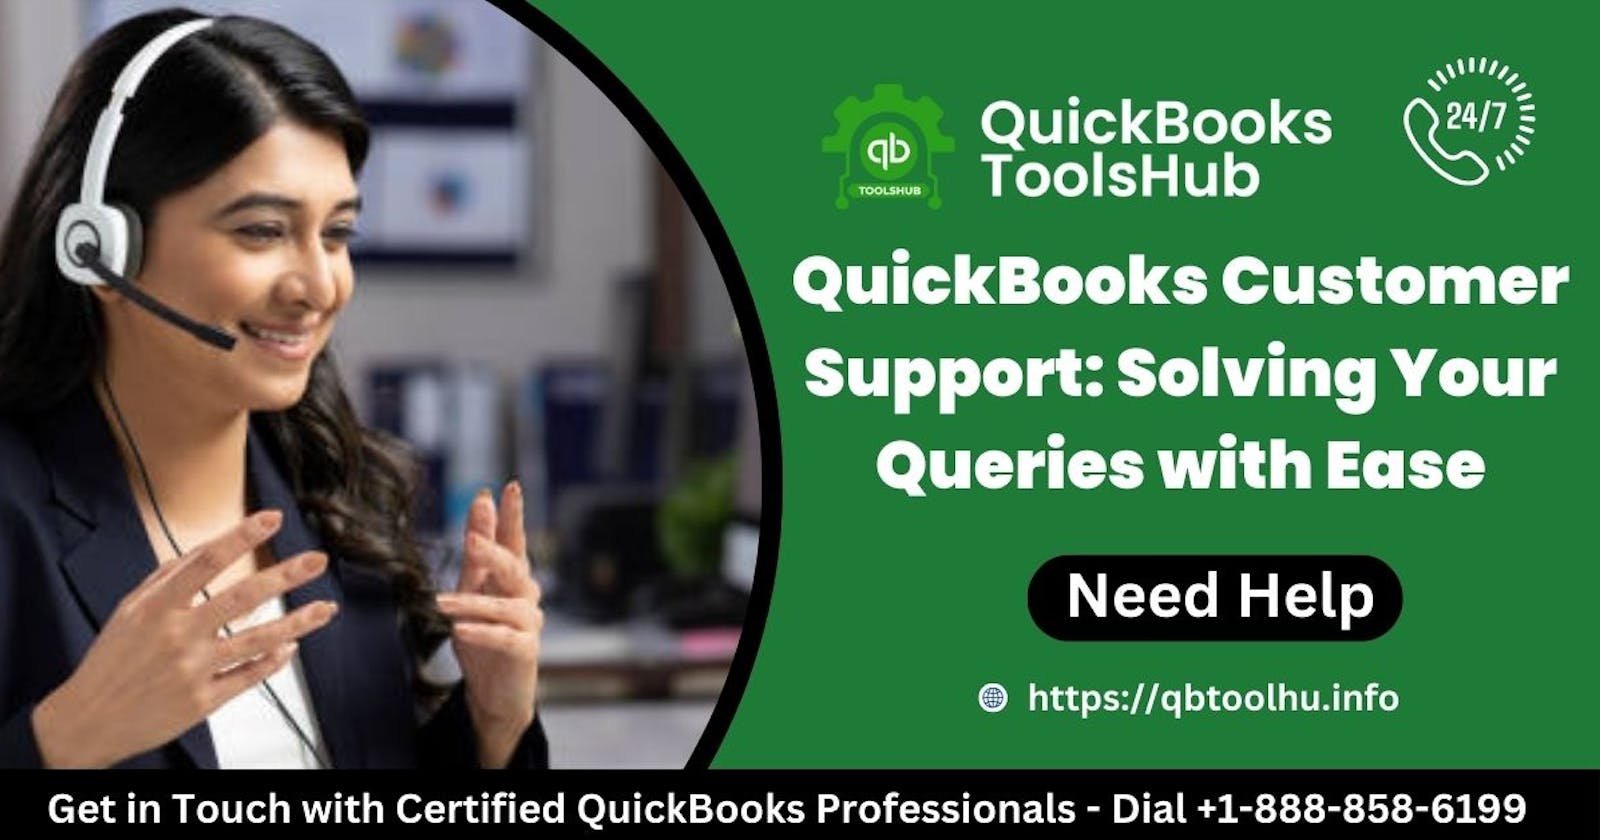 How to Speak to a Live Person at Intuit QuickBooks: A Comprehensive Guide